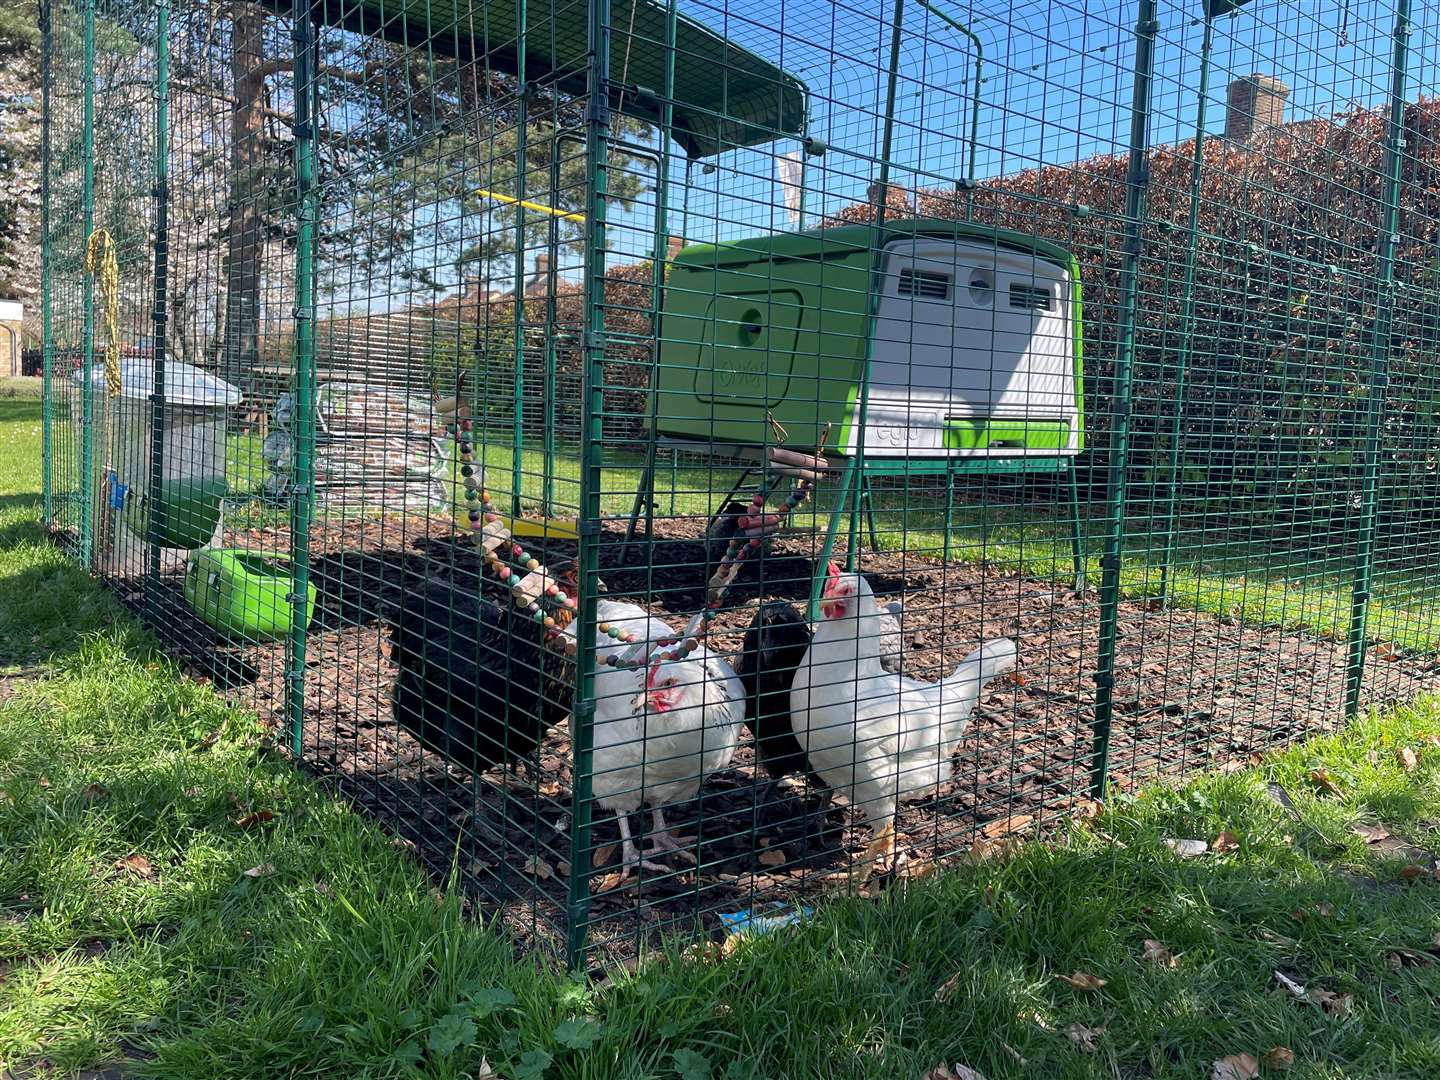 Chickens are one of the well-being initiatives already set up